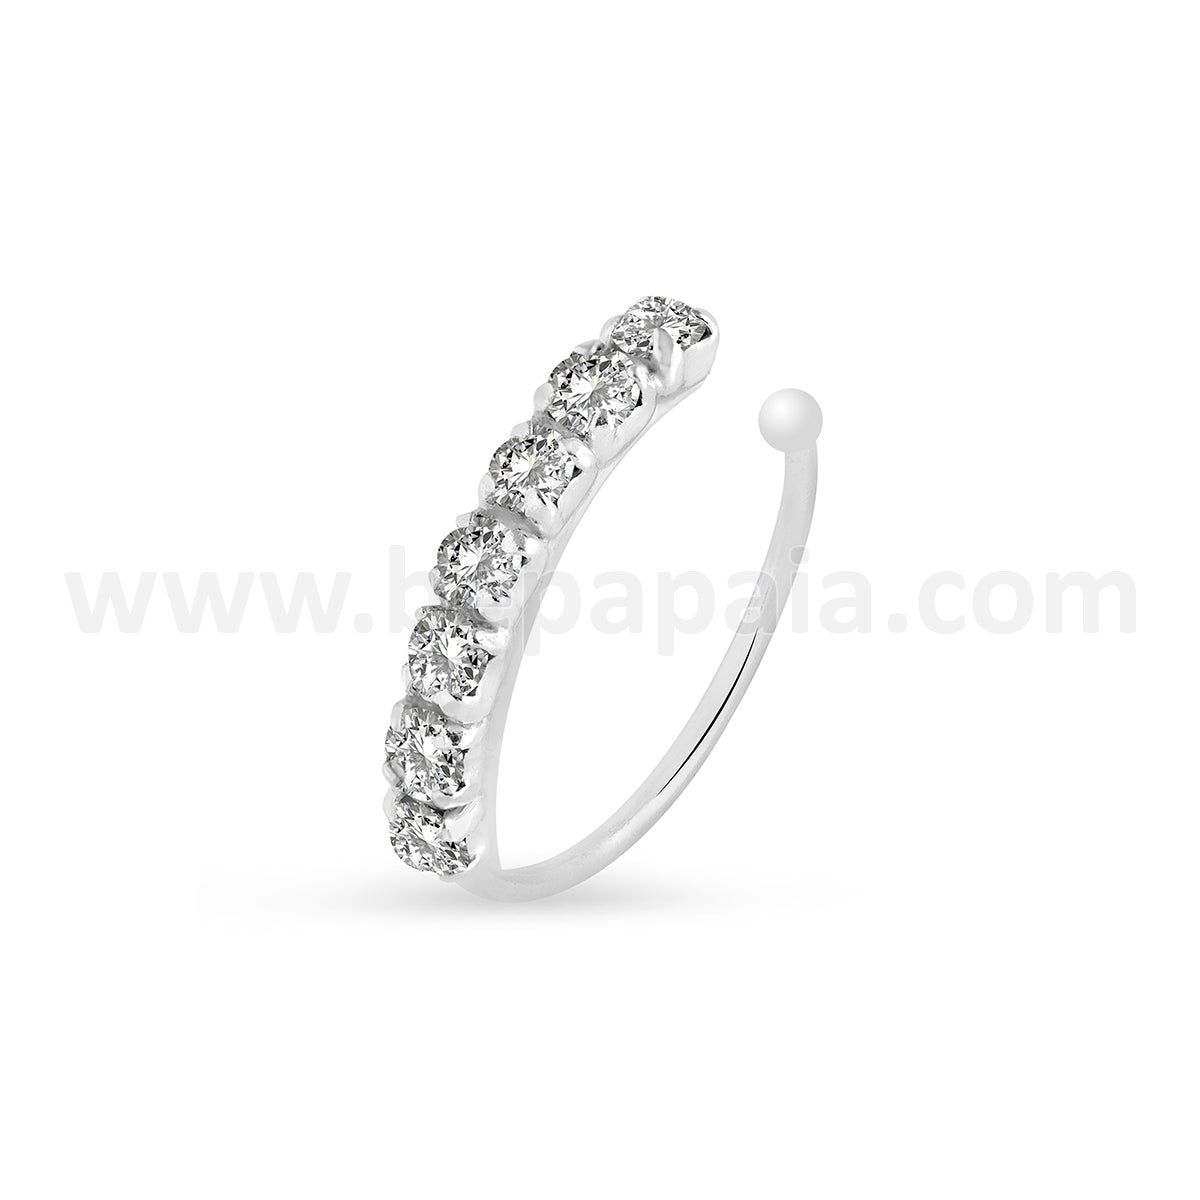 Adjustable silver clip-on ring for nose and ear